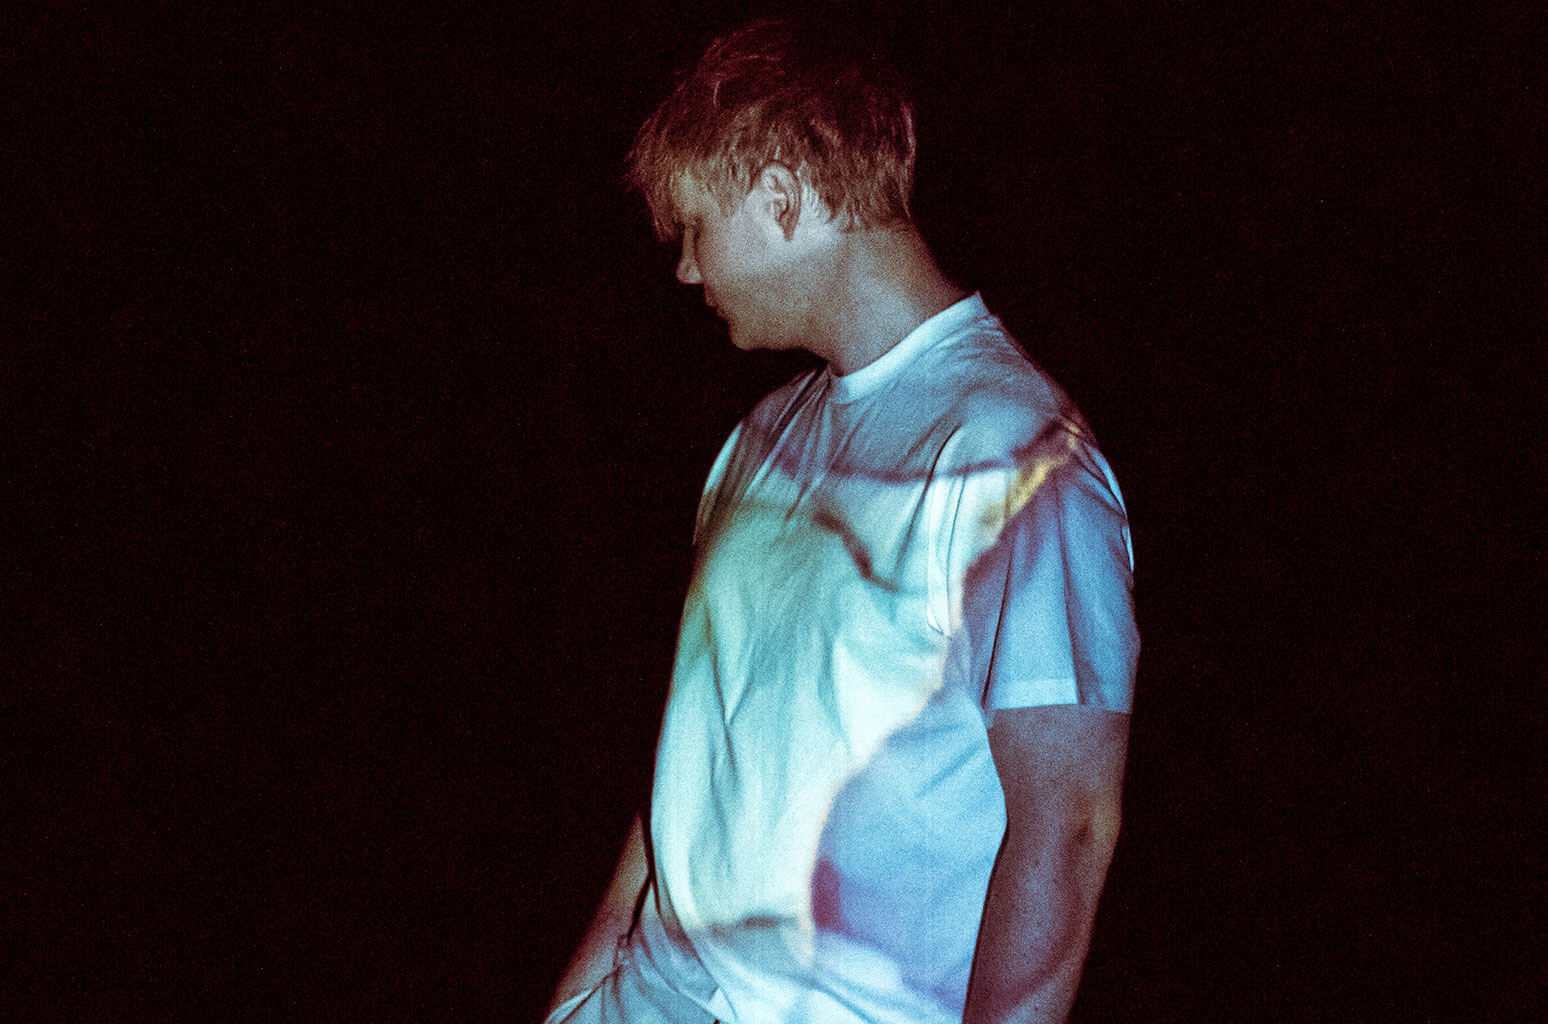 Kasbo Breaks Silence with Single ‘I Get You’ featuring Lizzy Land